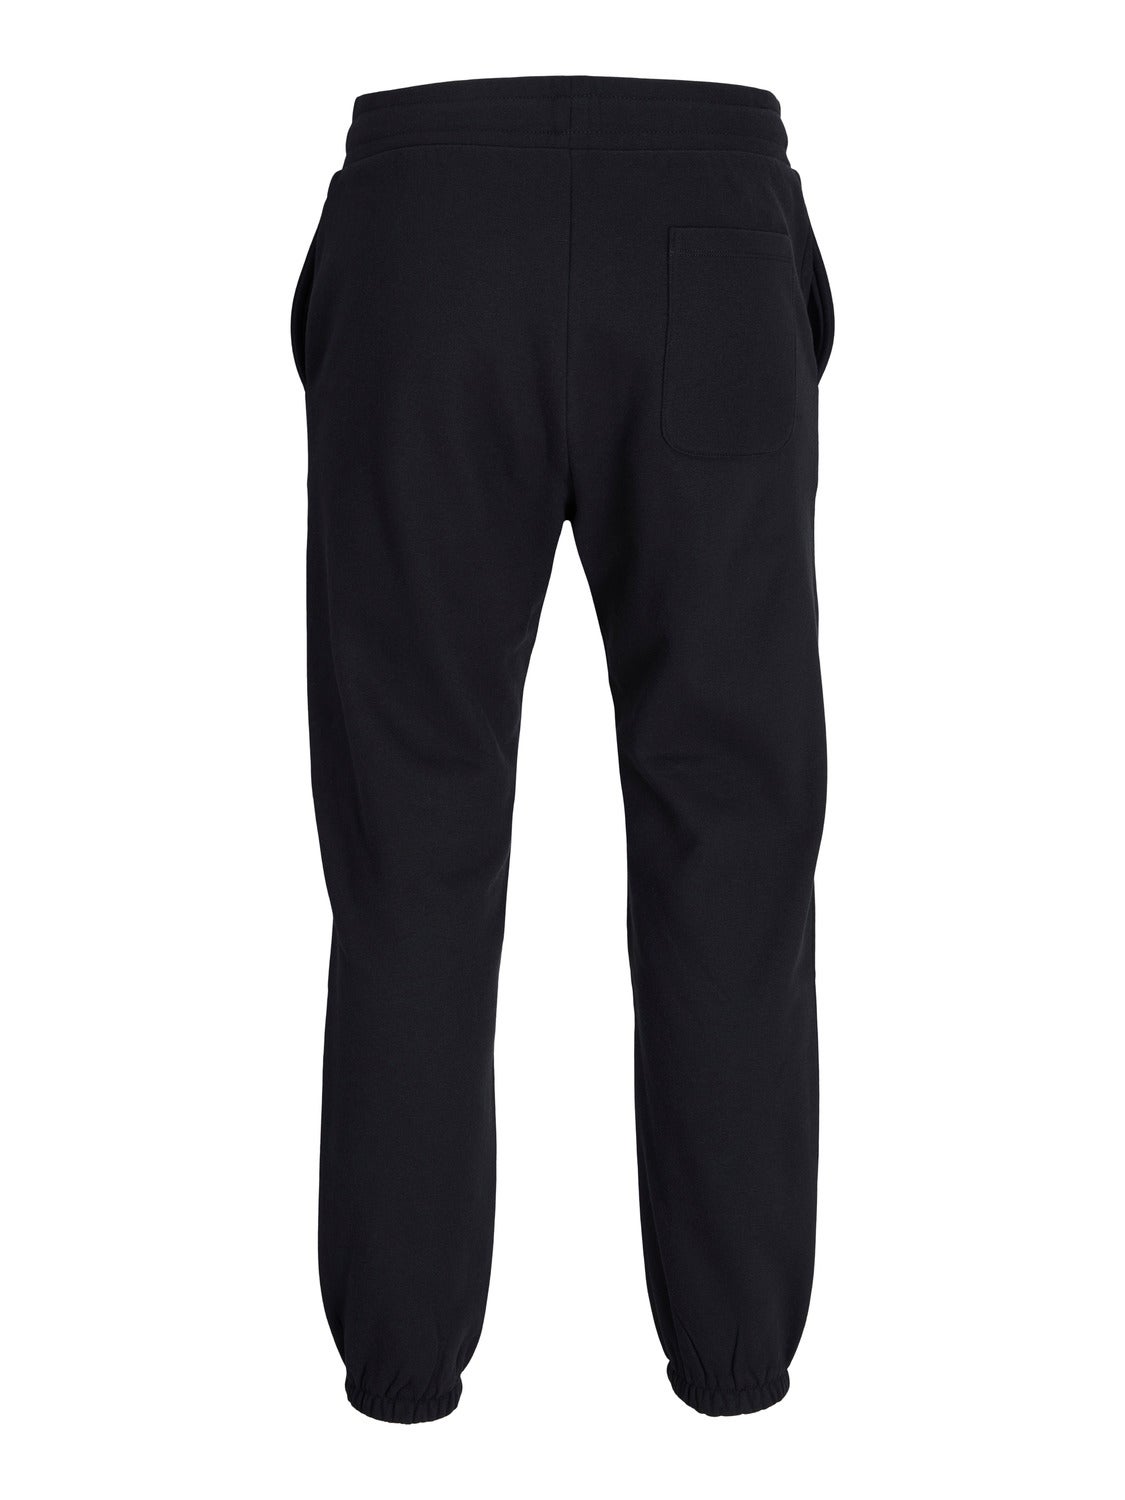 These Comfy Sweatpants Are Perfect for Fall Travel